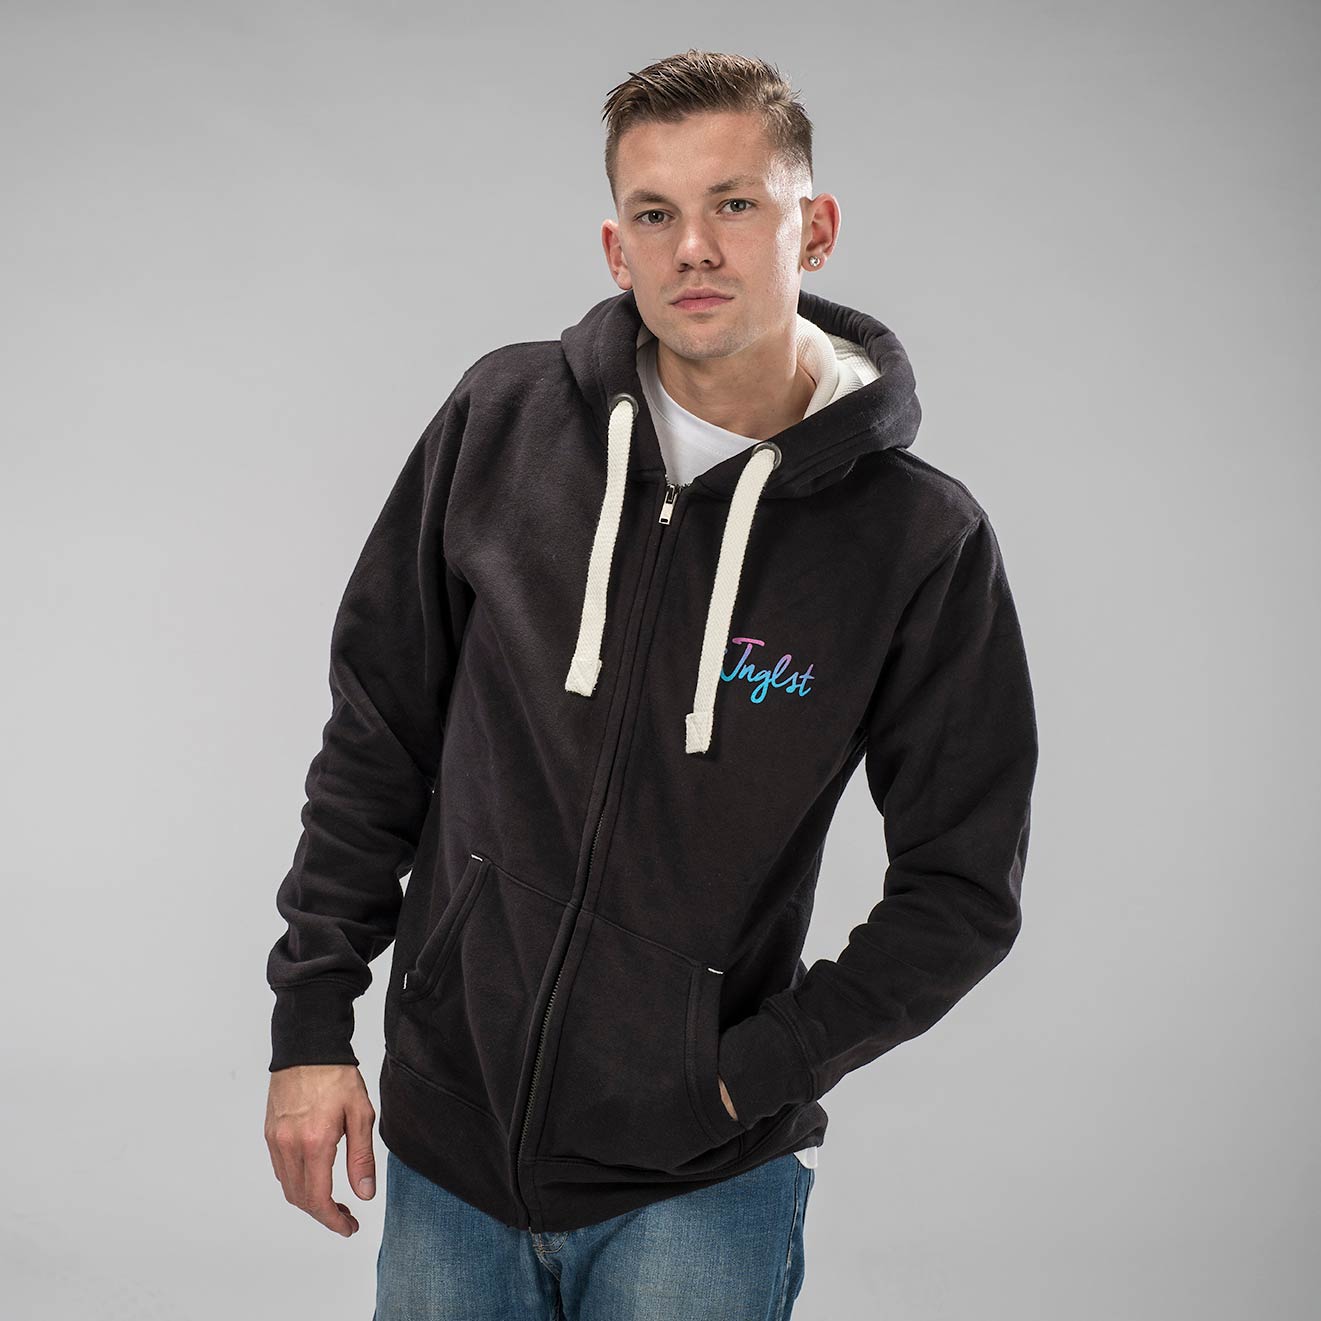 Jnglst Fader Hoodie from the front from Junglist Clothing